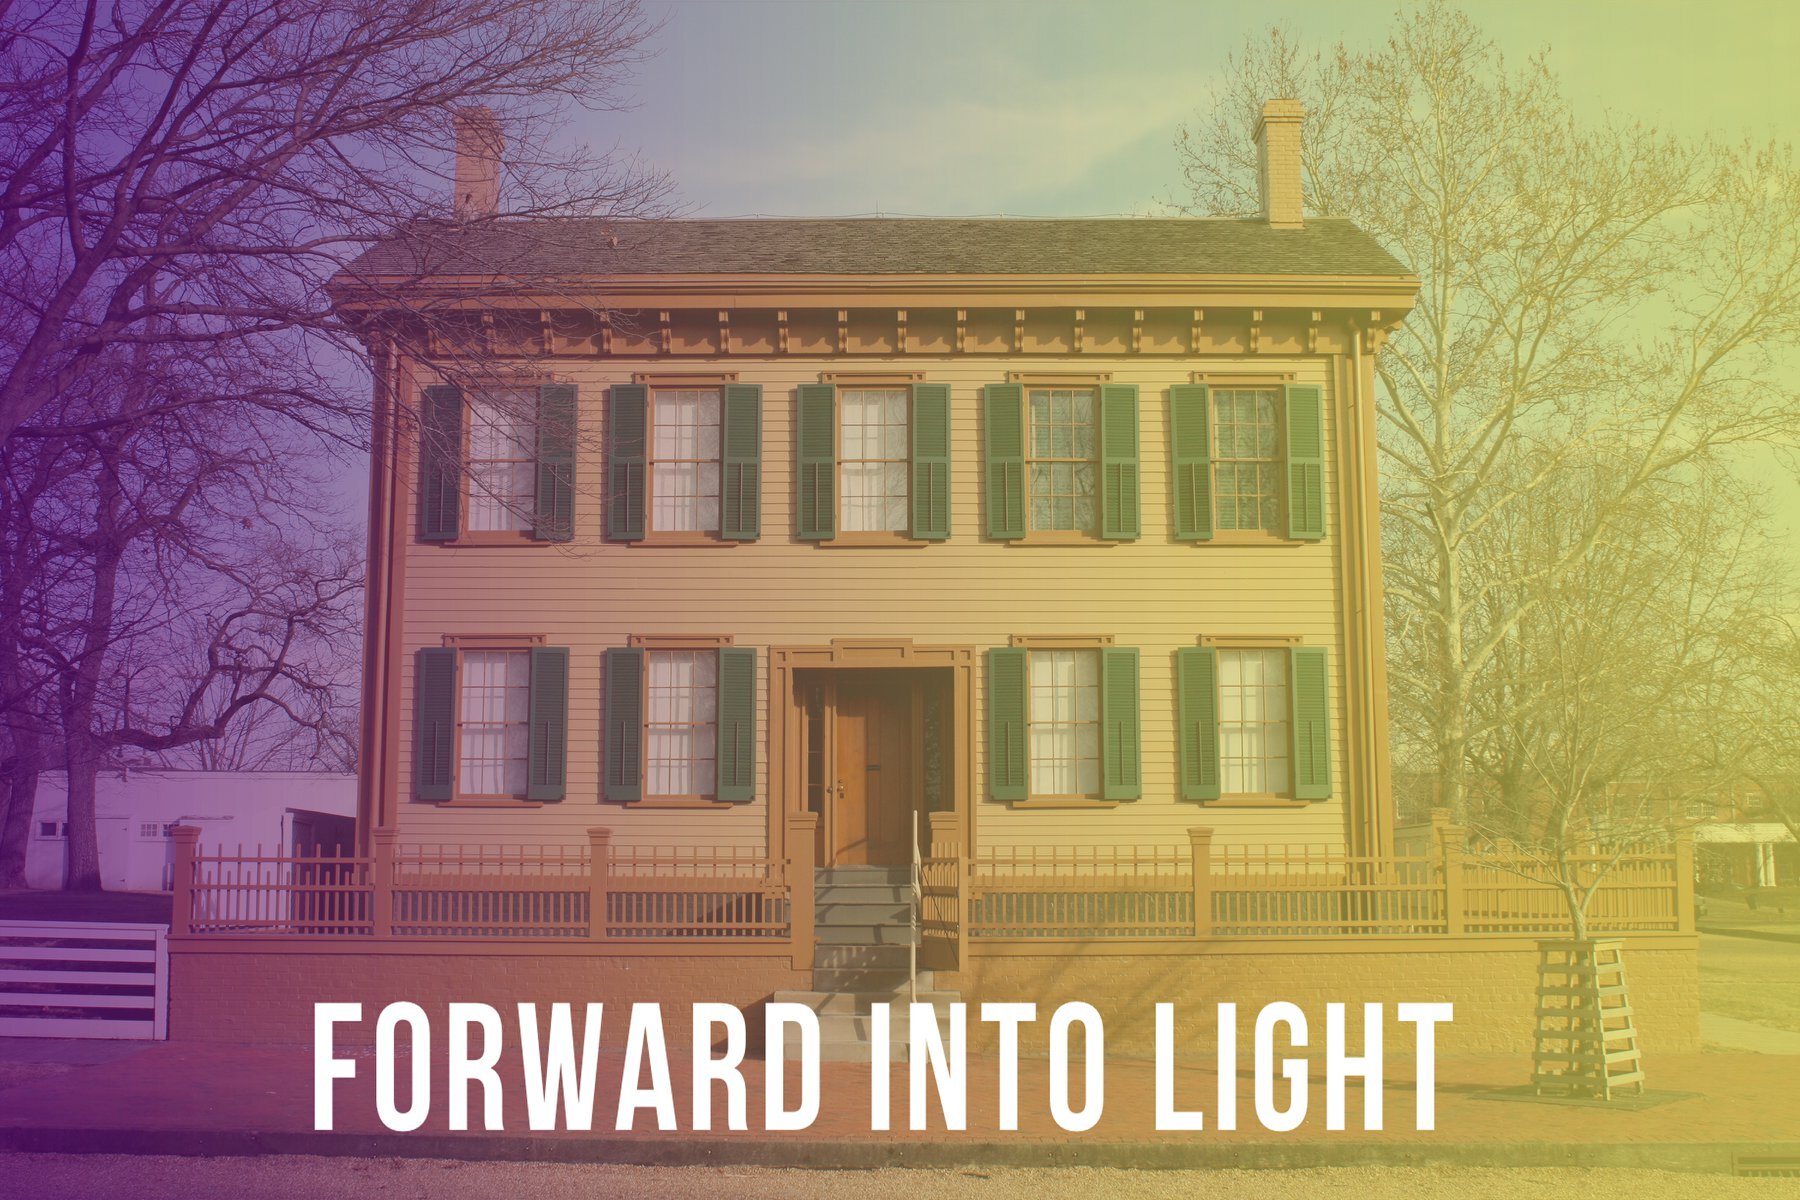 Photo of a two-story brown house filtered to appear purple and yellow with text reading "Forward Into Light"